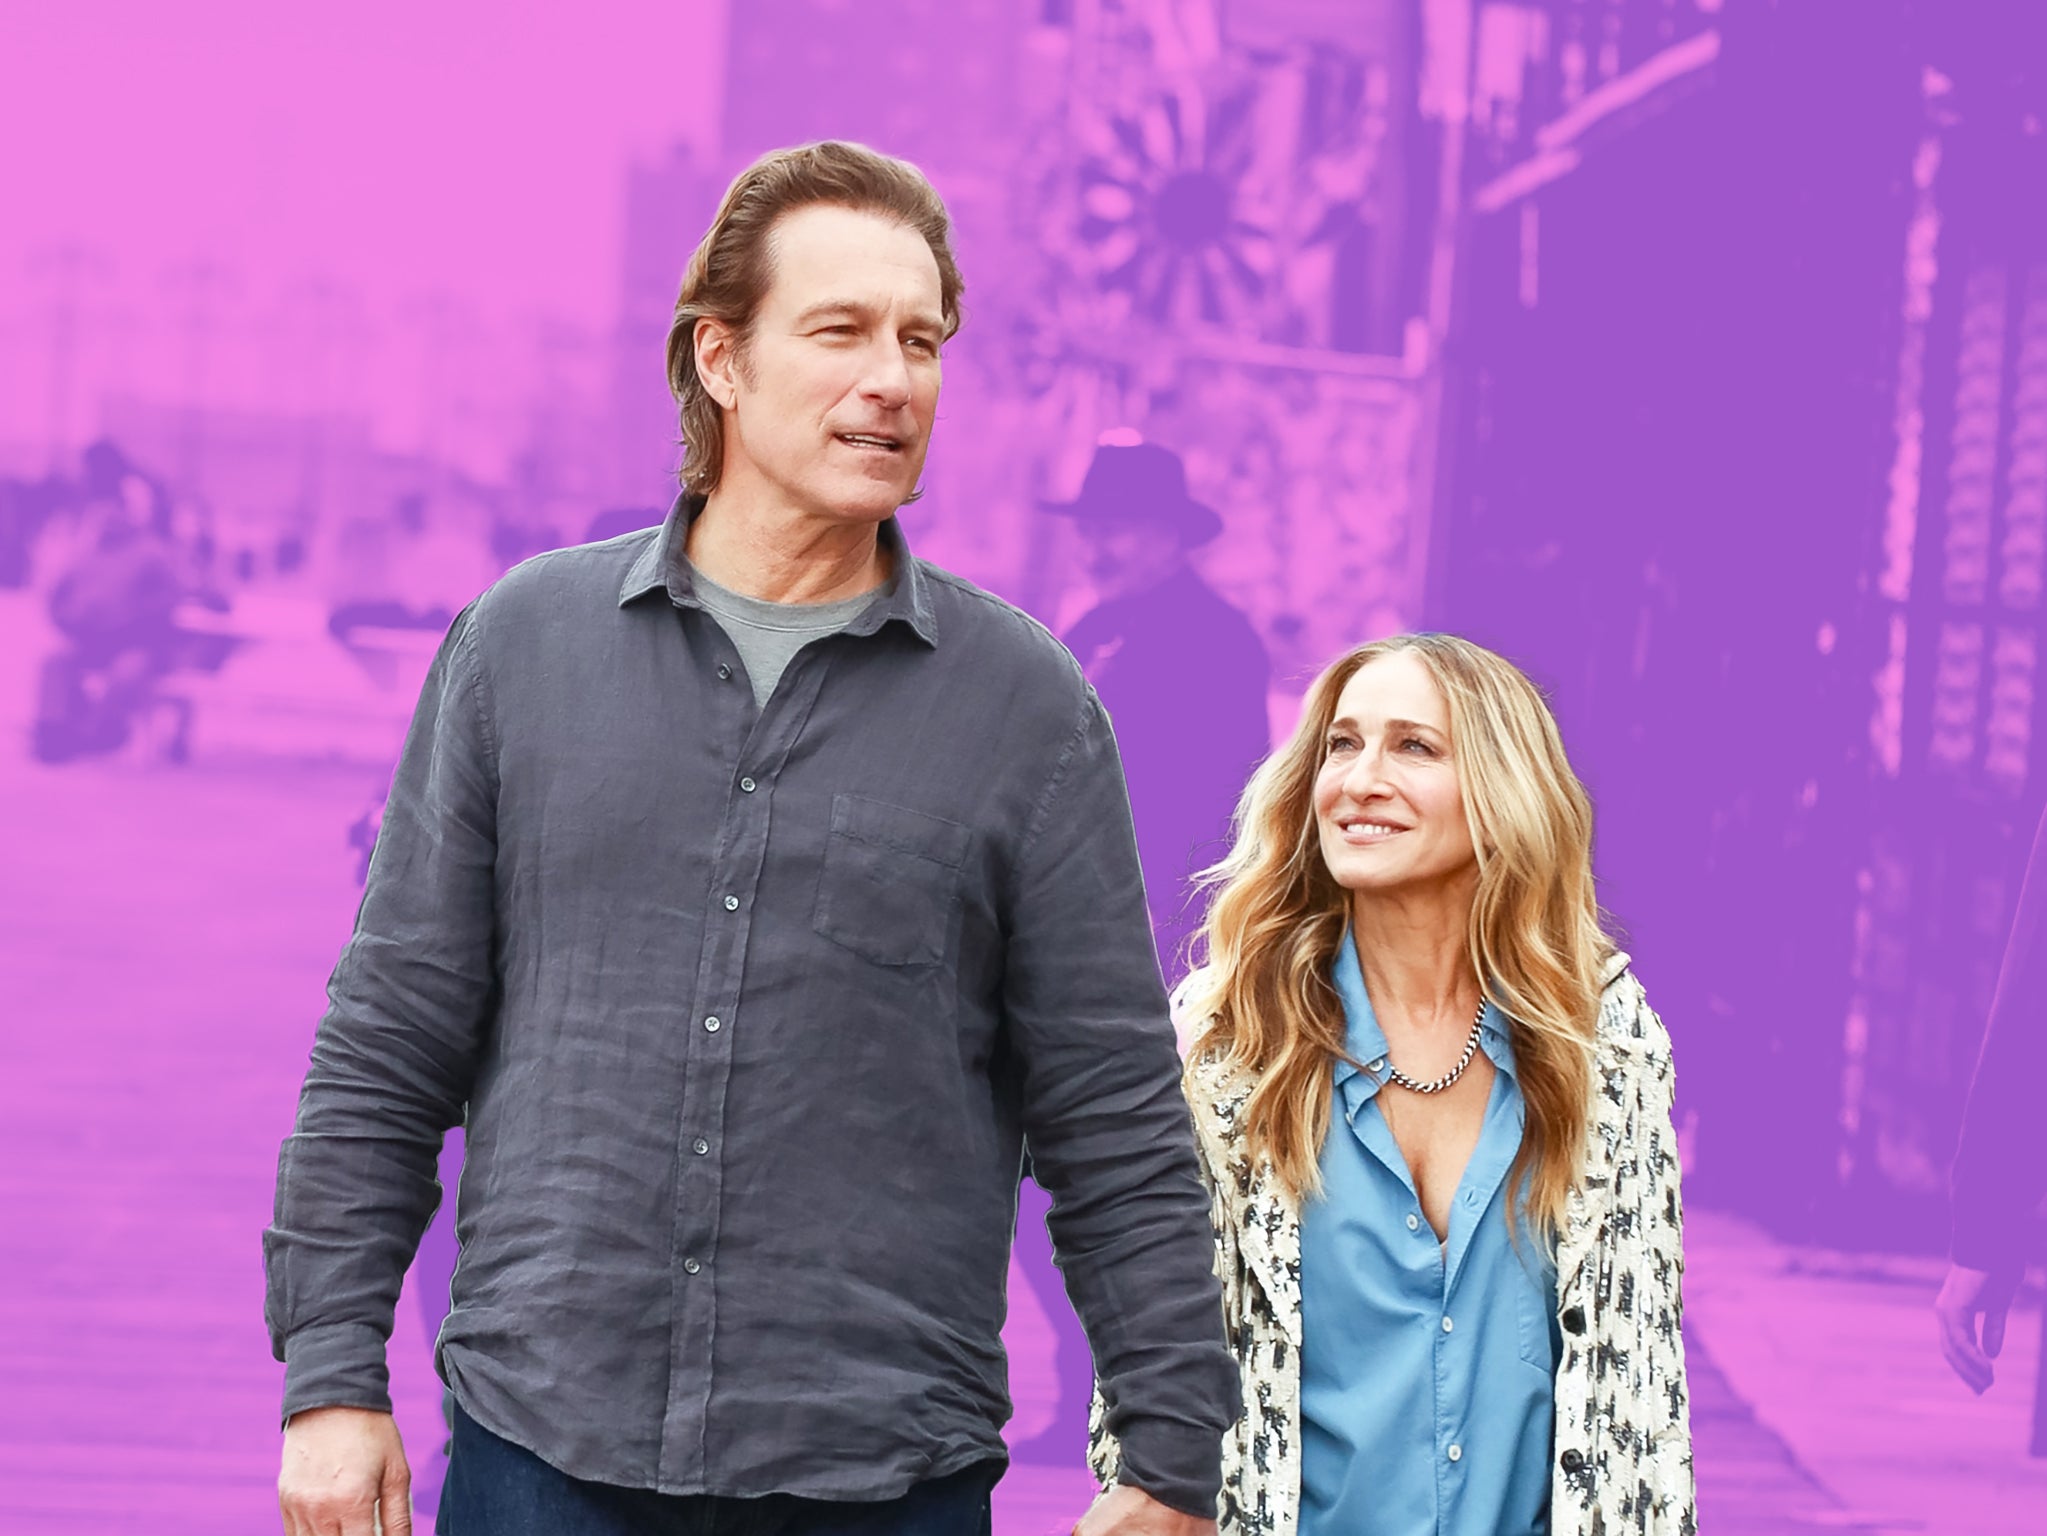 John Corbett and Sarah Jessica Parker, aka Aidan and Carrie, film scenes for the next season of ‘And Just Like That...’ this month